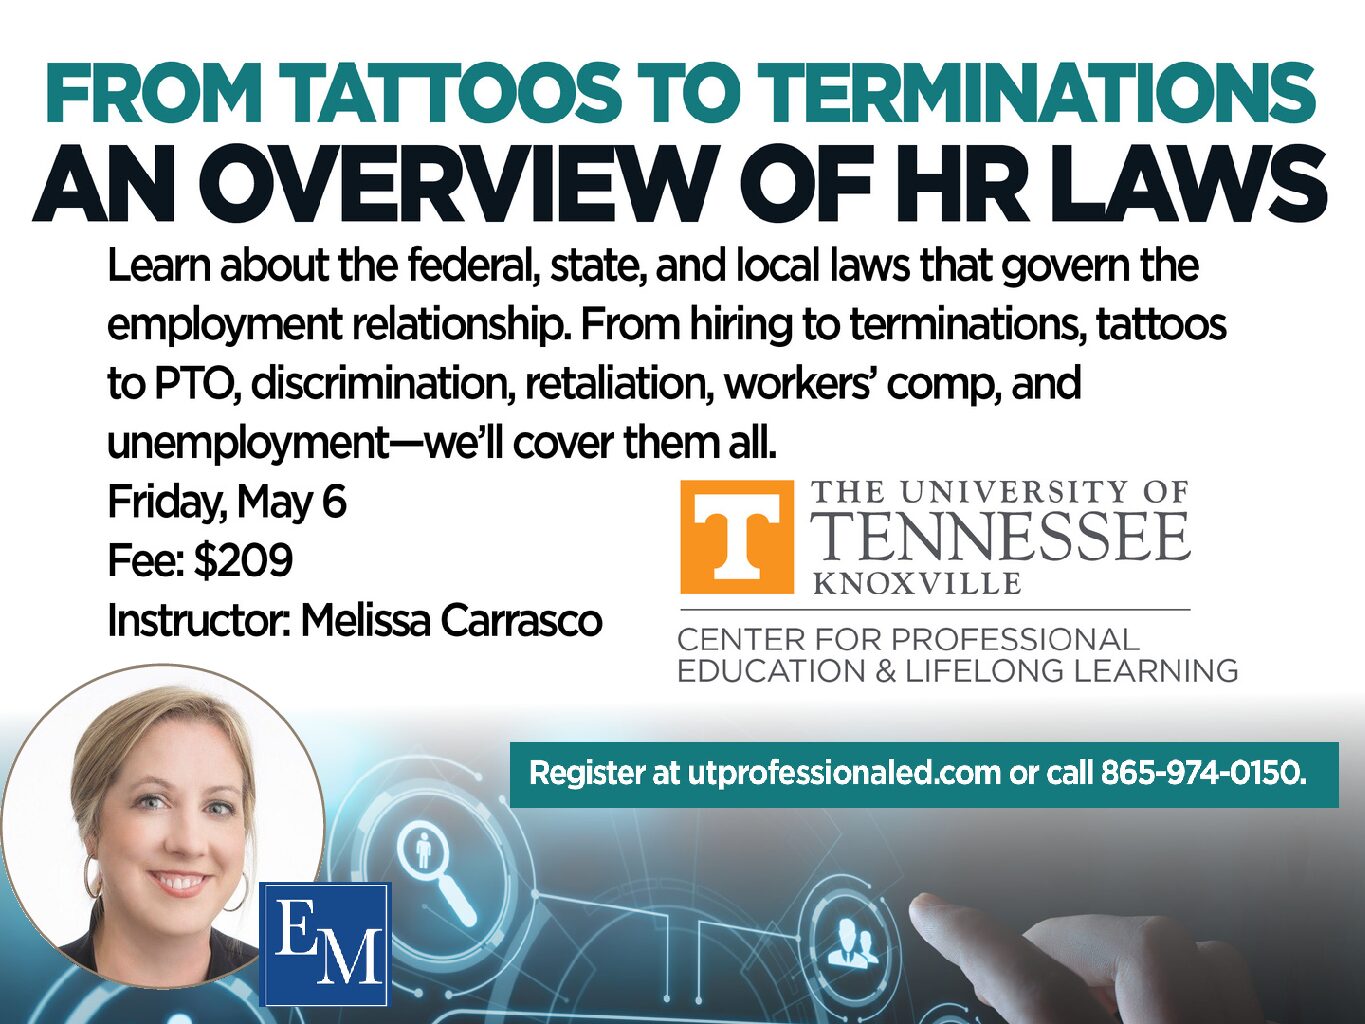 Melissa Carrasco Teaches, Tattoos to Terminations, at the University of Tennessee Center for Professional Education and Lifelong Learning